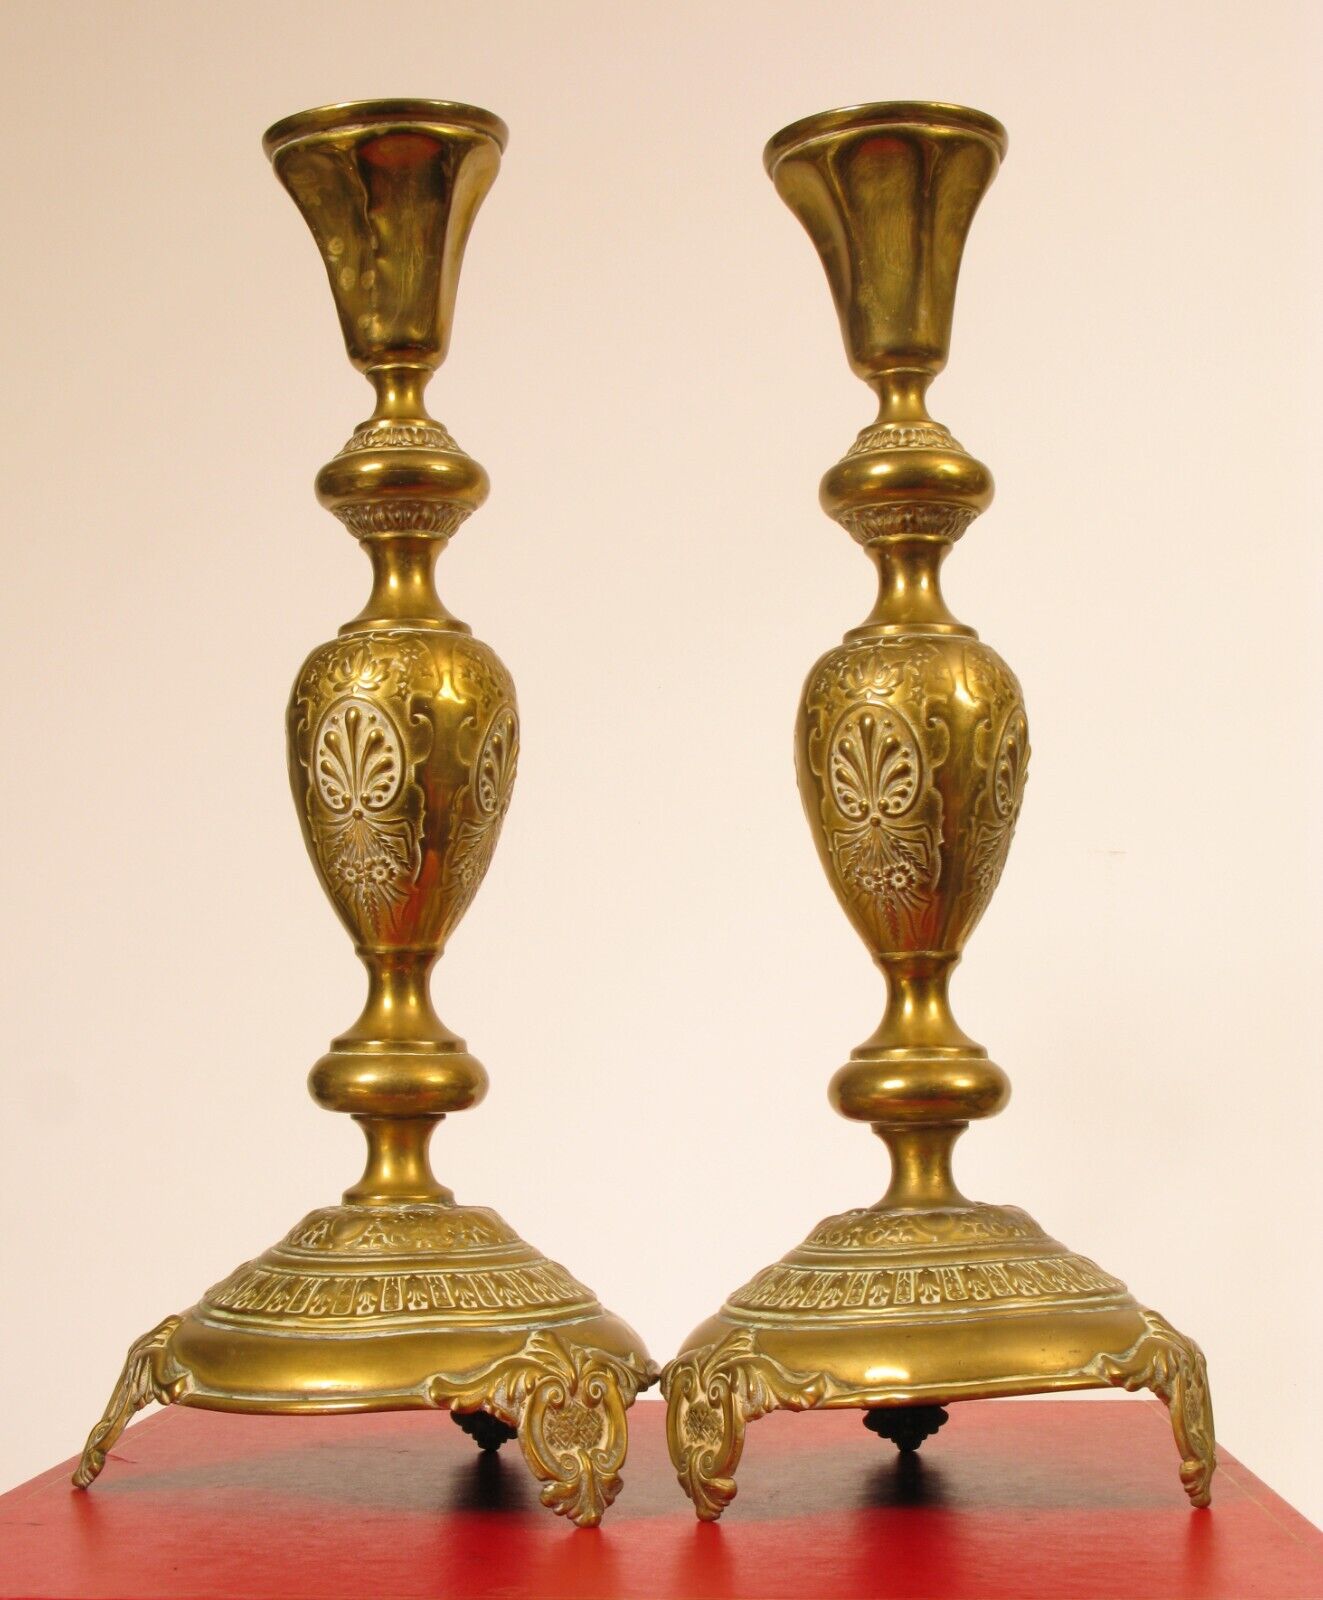 FABULOUS ANTIQUE PAIR OF BRASS CANDLE STICK HOLDERS FANCY ORNATE NORBLIN & CO 